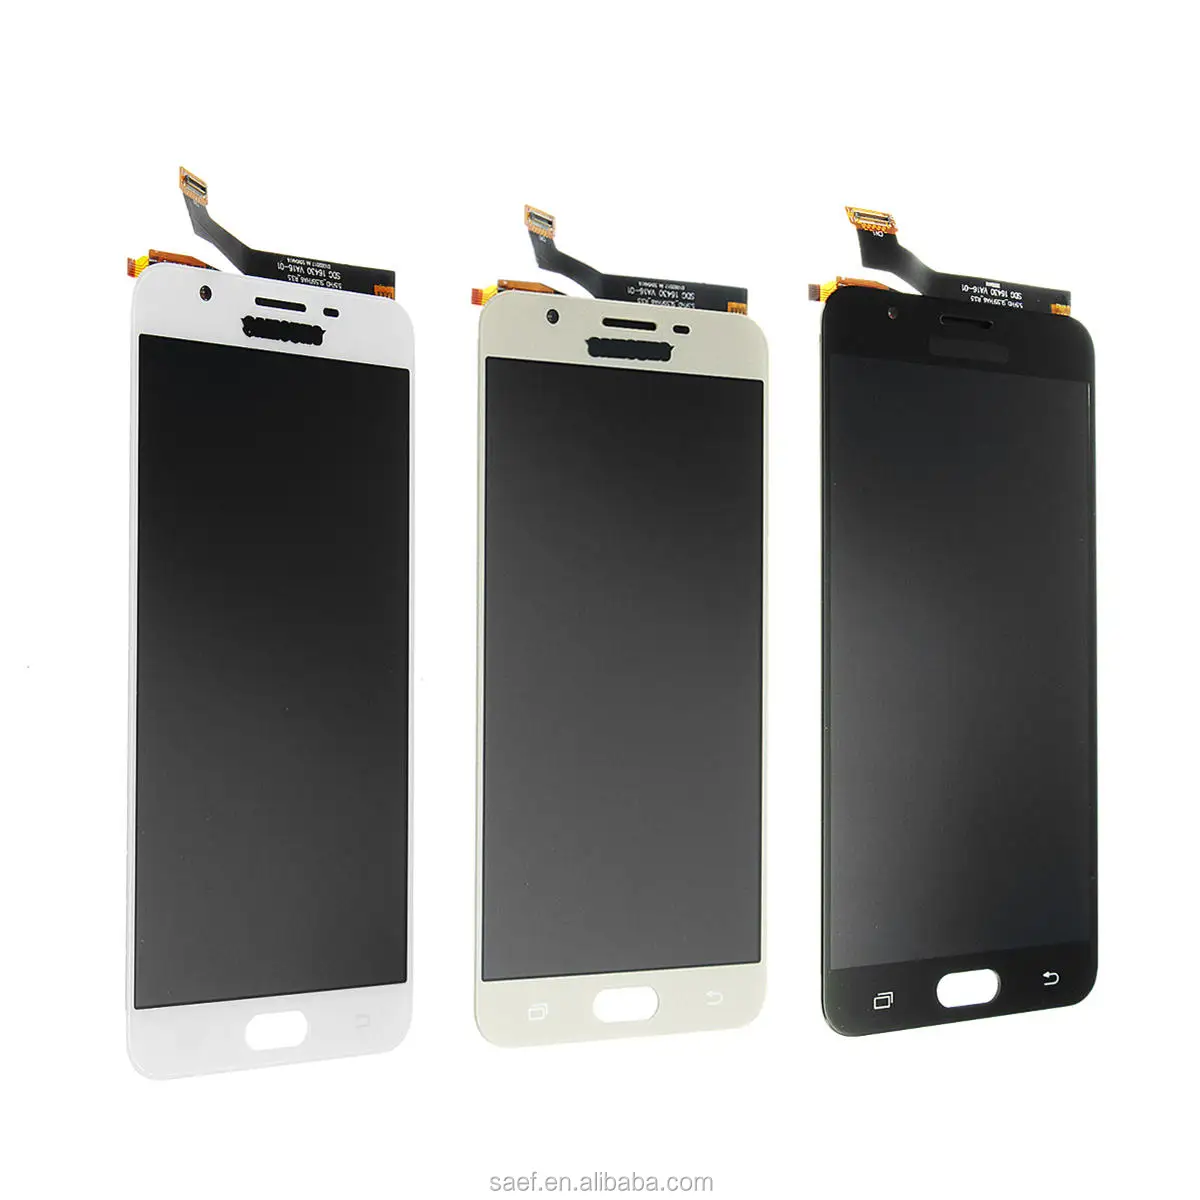 

For Samsung Galaxy J7 Prime LCD Screen Replacement TFT display Touch Digitizer Assembly Part Original Quality, Black